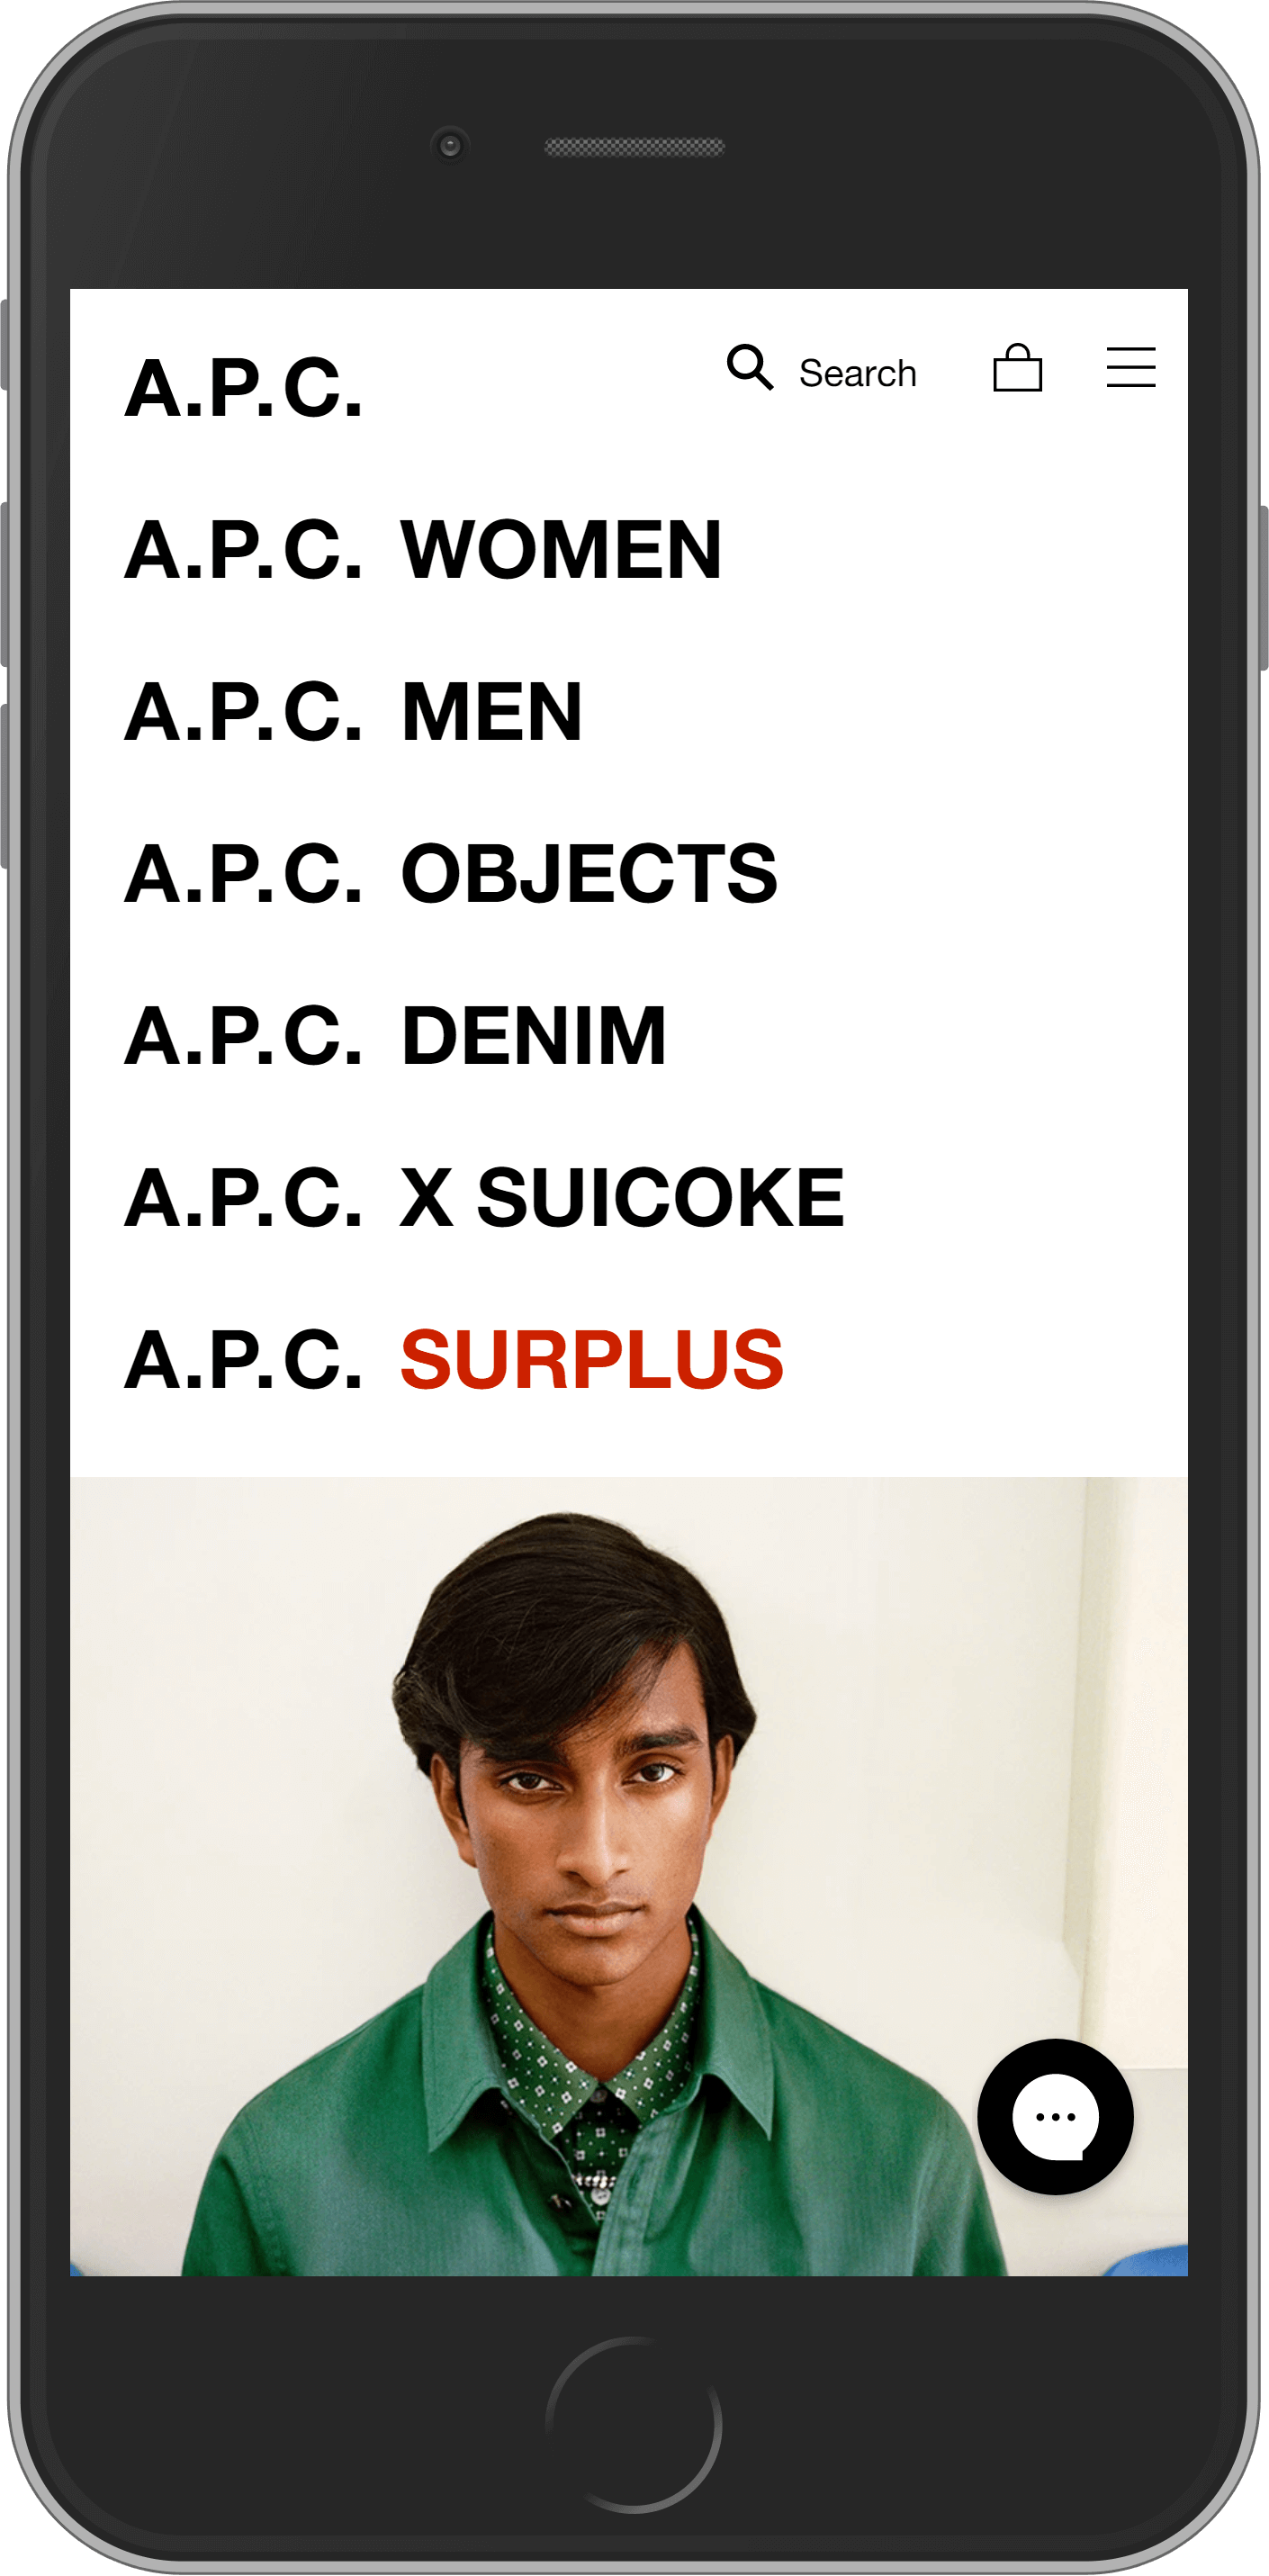 A.P.C. on mobile